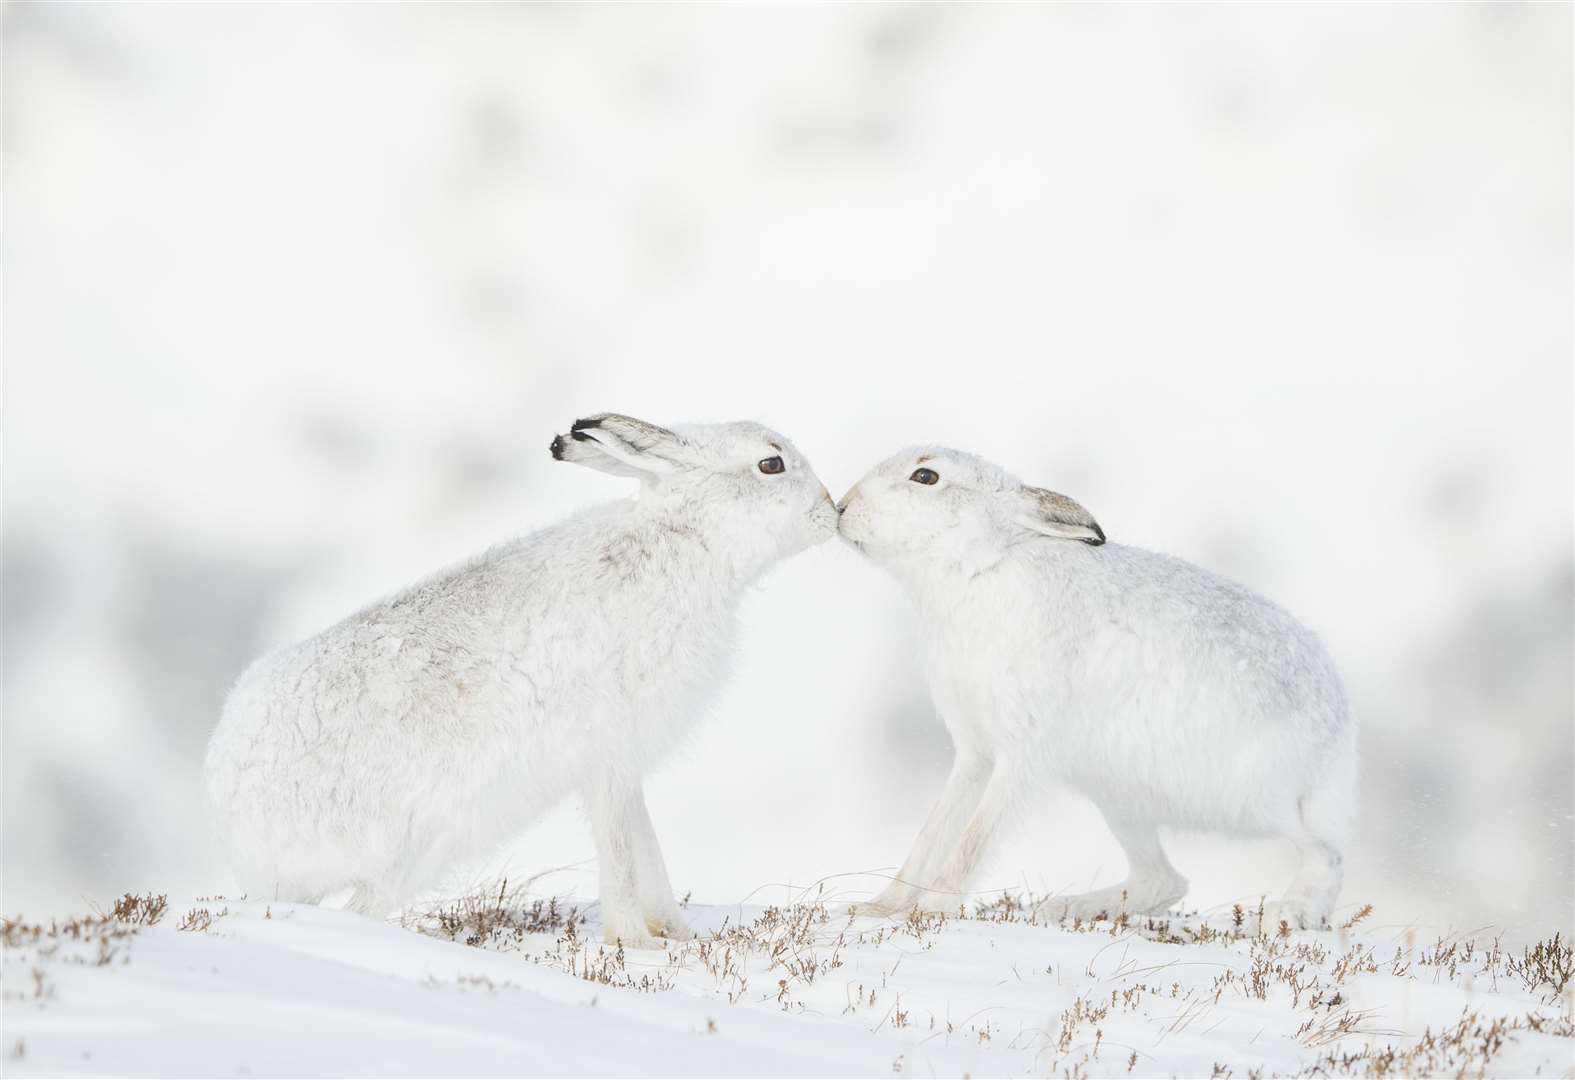 Two courting mountain hares in the Monadhliath Mountains in Scotland (Andy Parkinson/Wildlife Photographer of the Year/PA)